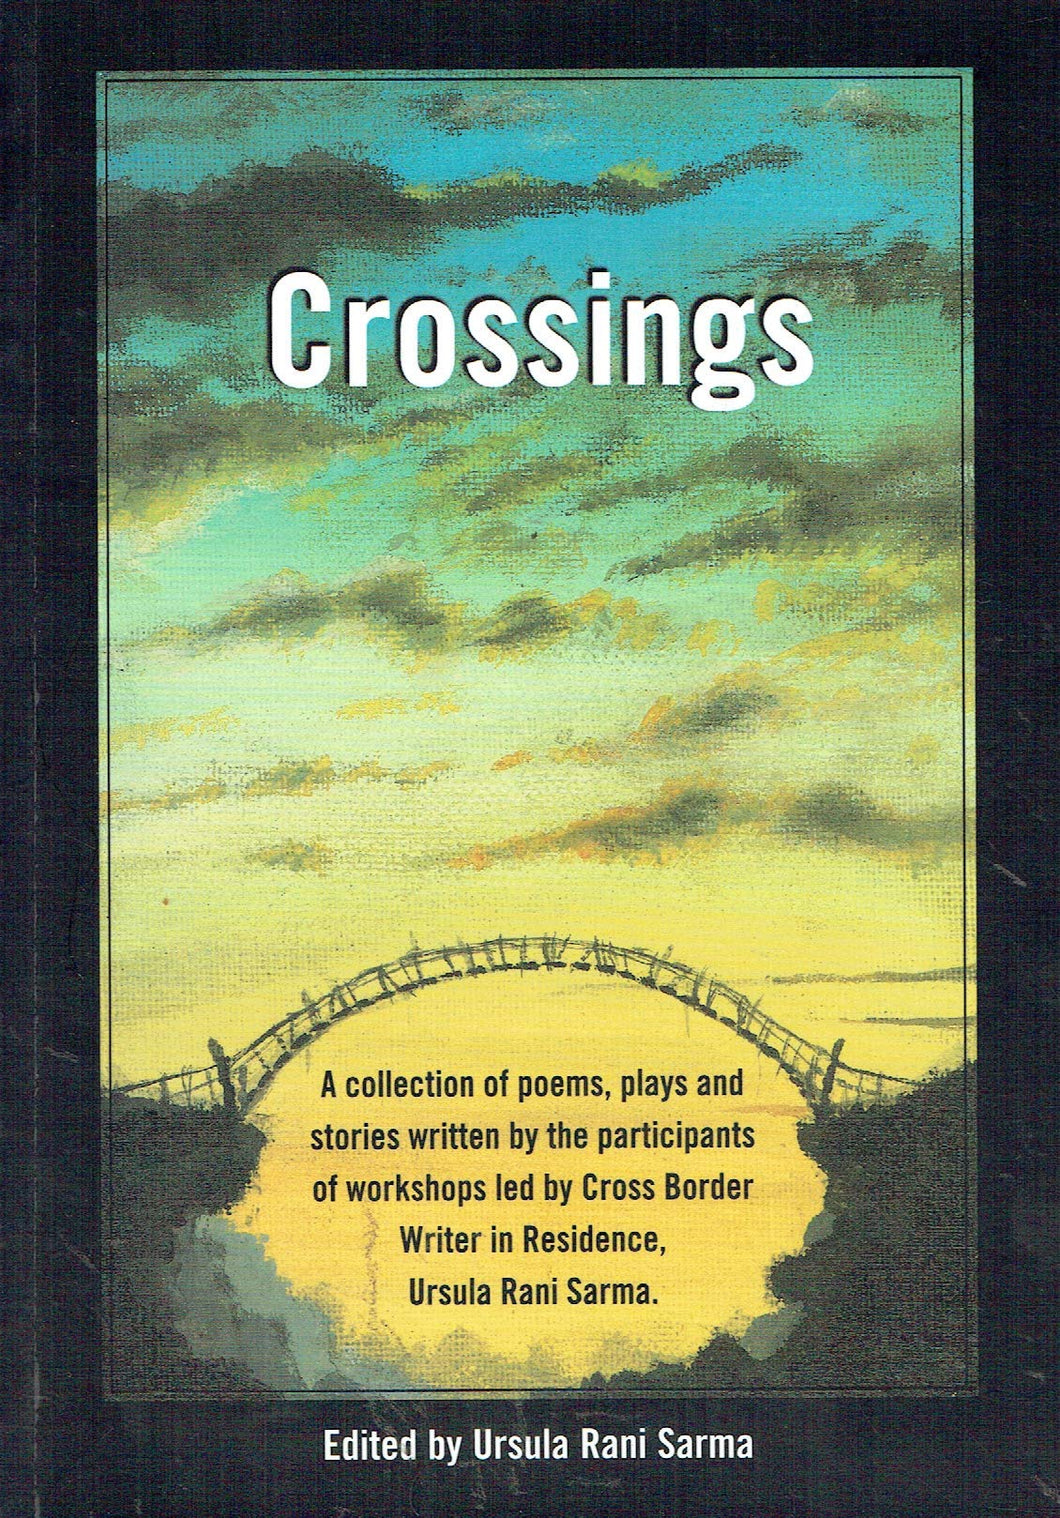 Crossings: A Collection of Poems, Plays and Stories Written by the Participants of Workshops Led by Cross Border Writer in Residence, Ursula Rani Sarma